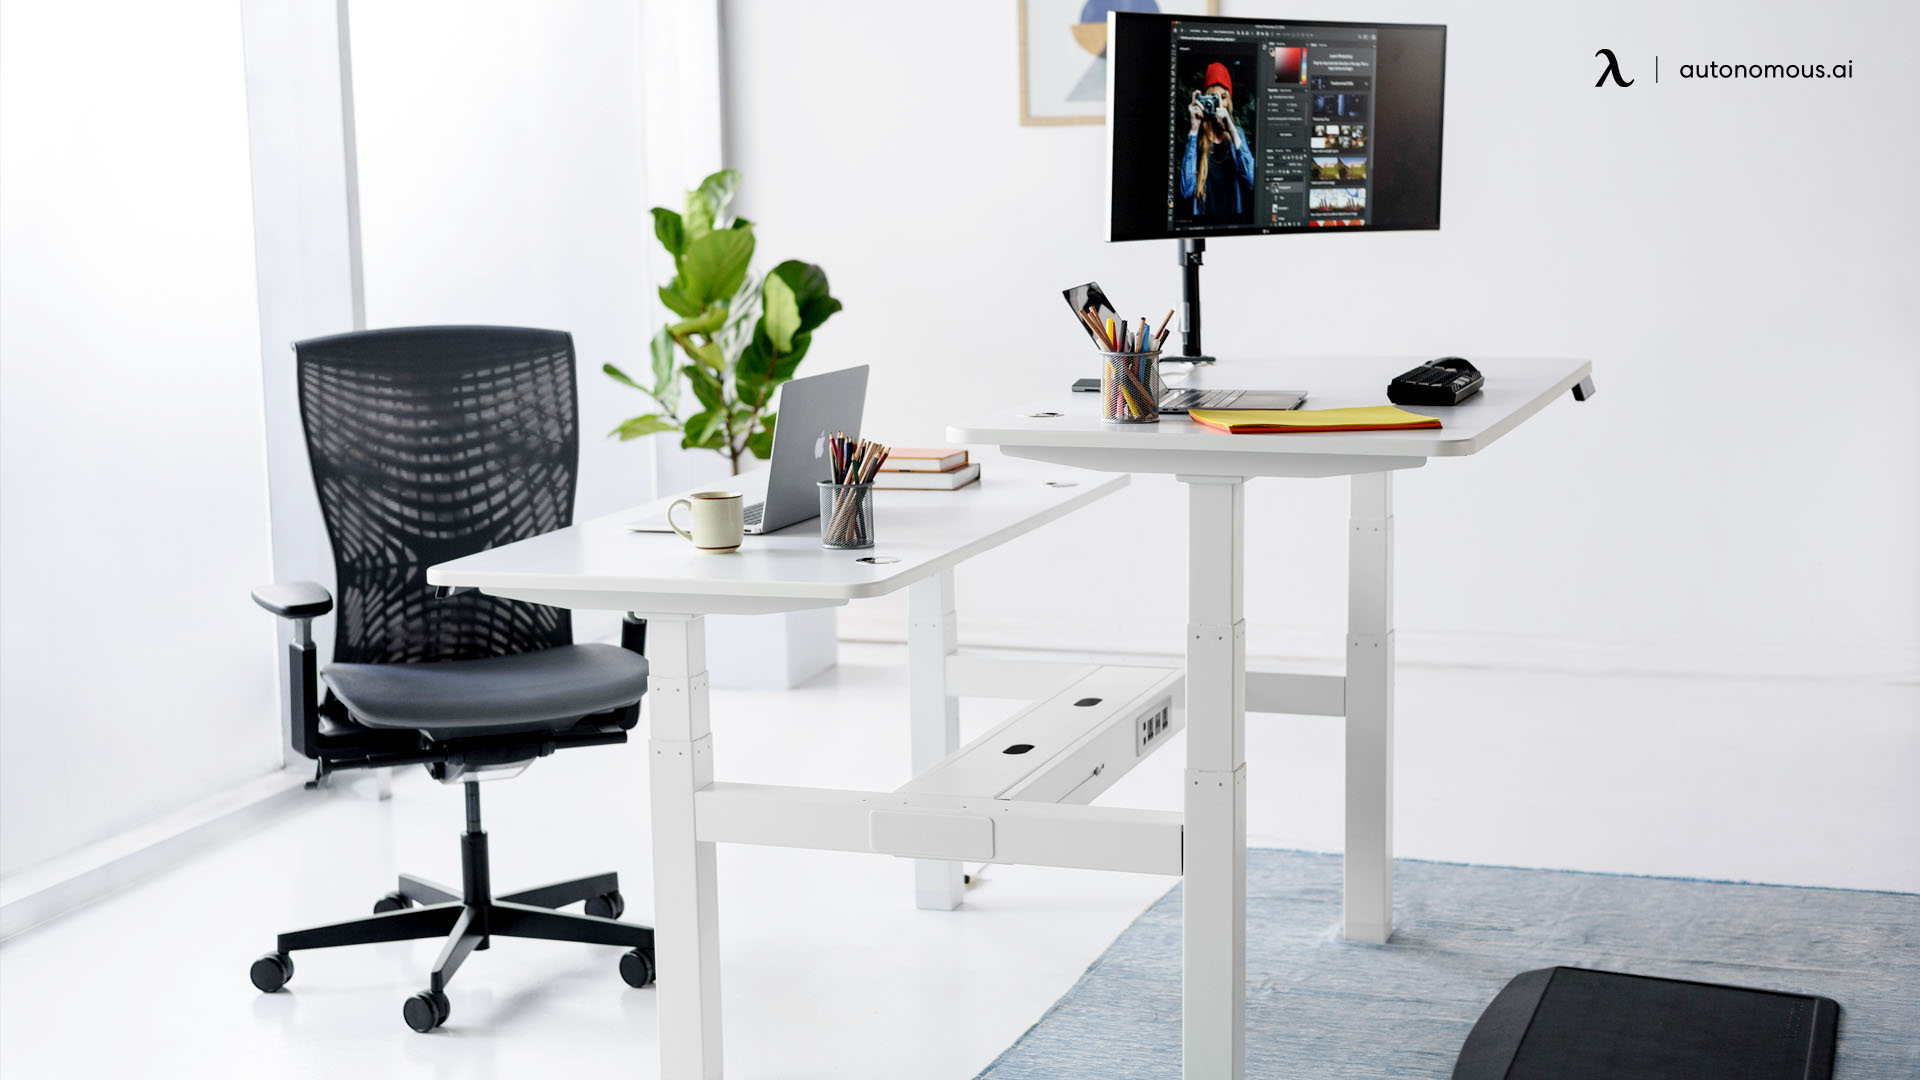 Ergonomic Office Tips: Place Other Accessories